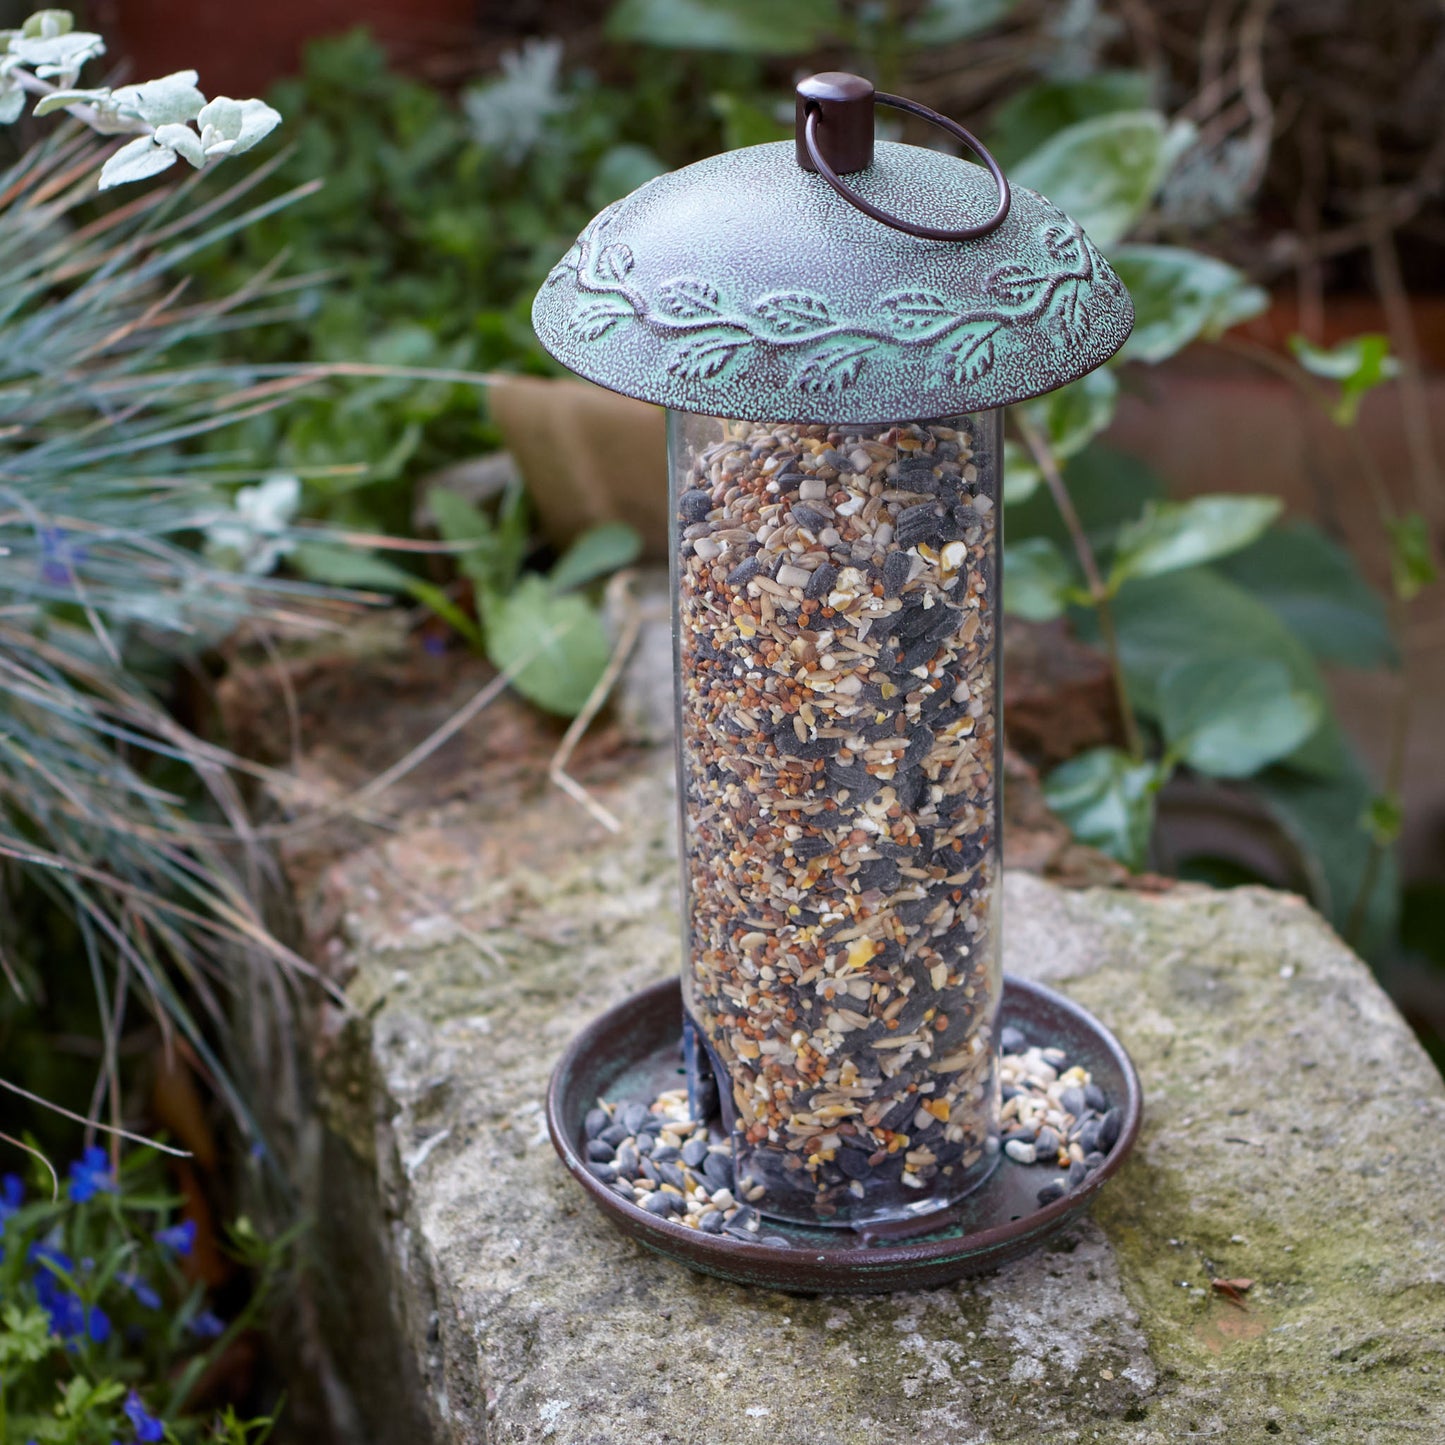 Peckish Secret Garden Seed Feeder with seed mix in 